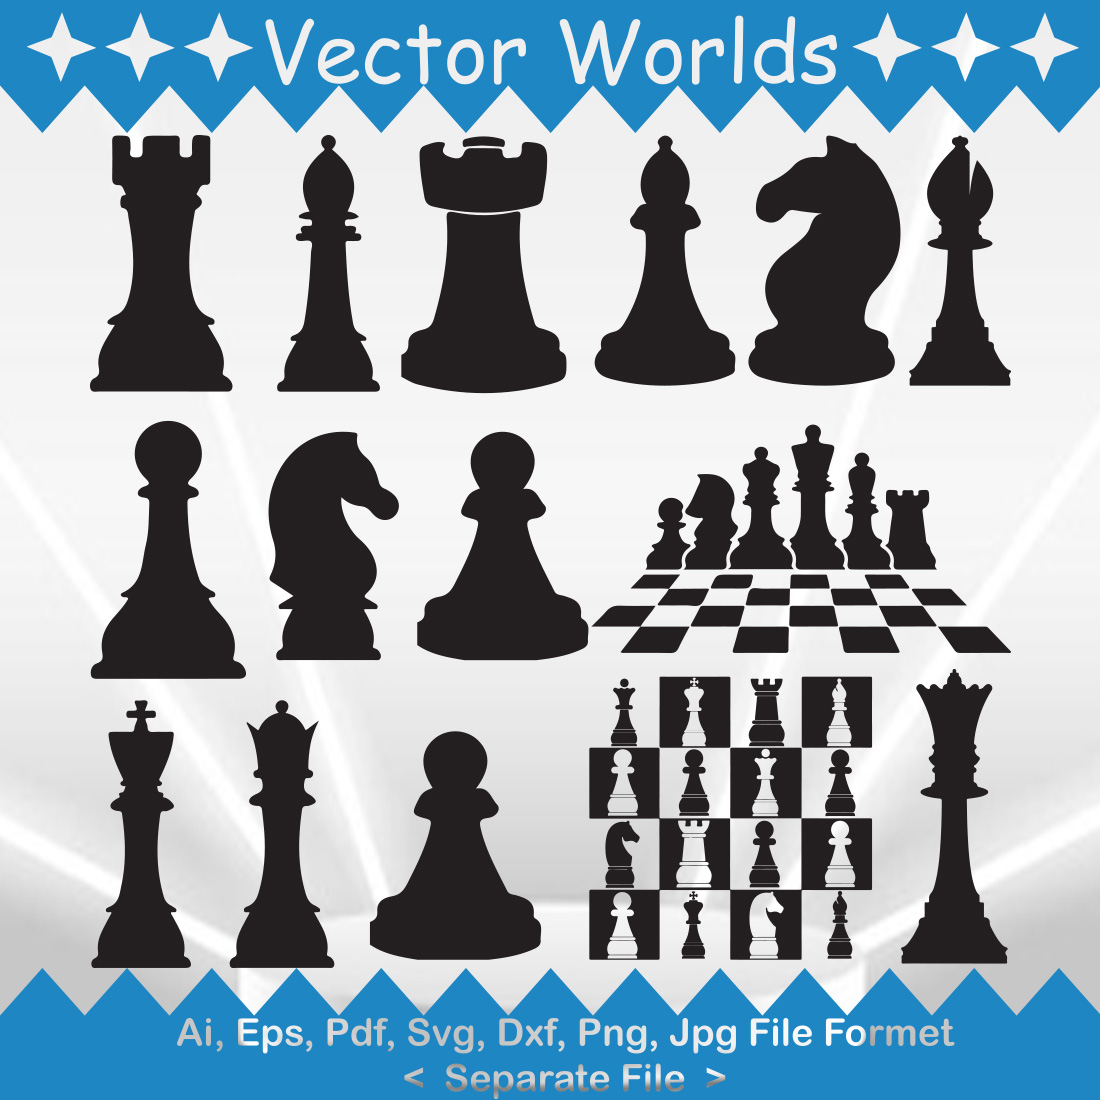 A selection of amazing vector images of chess.